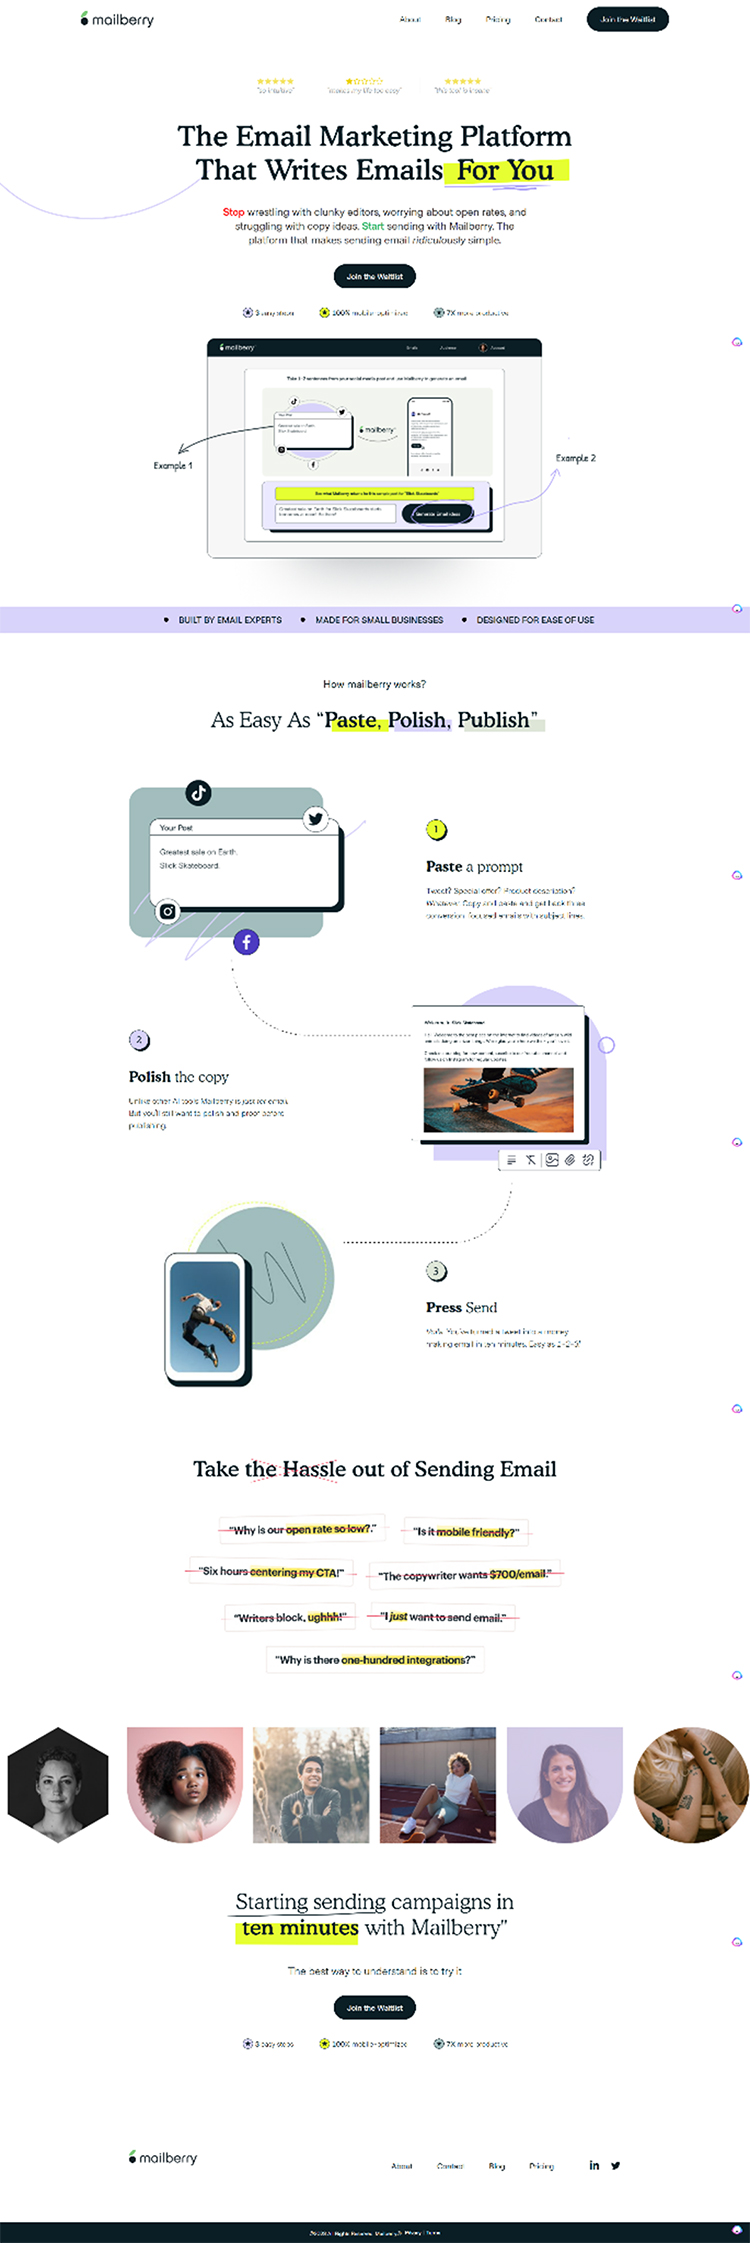 Use a short landing page if…The Design Speaks For Itself 